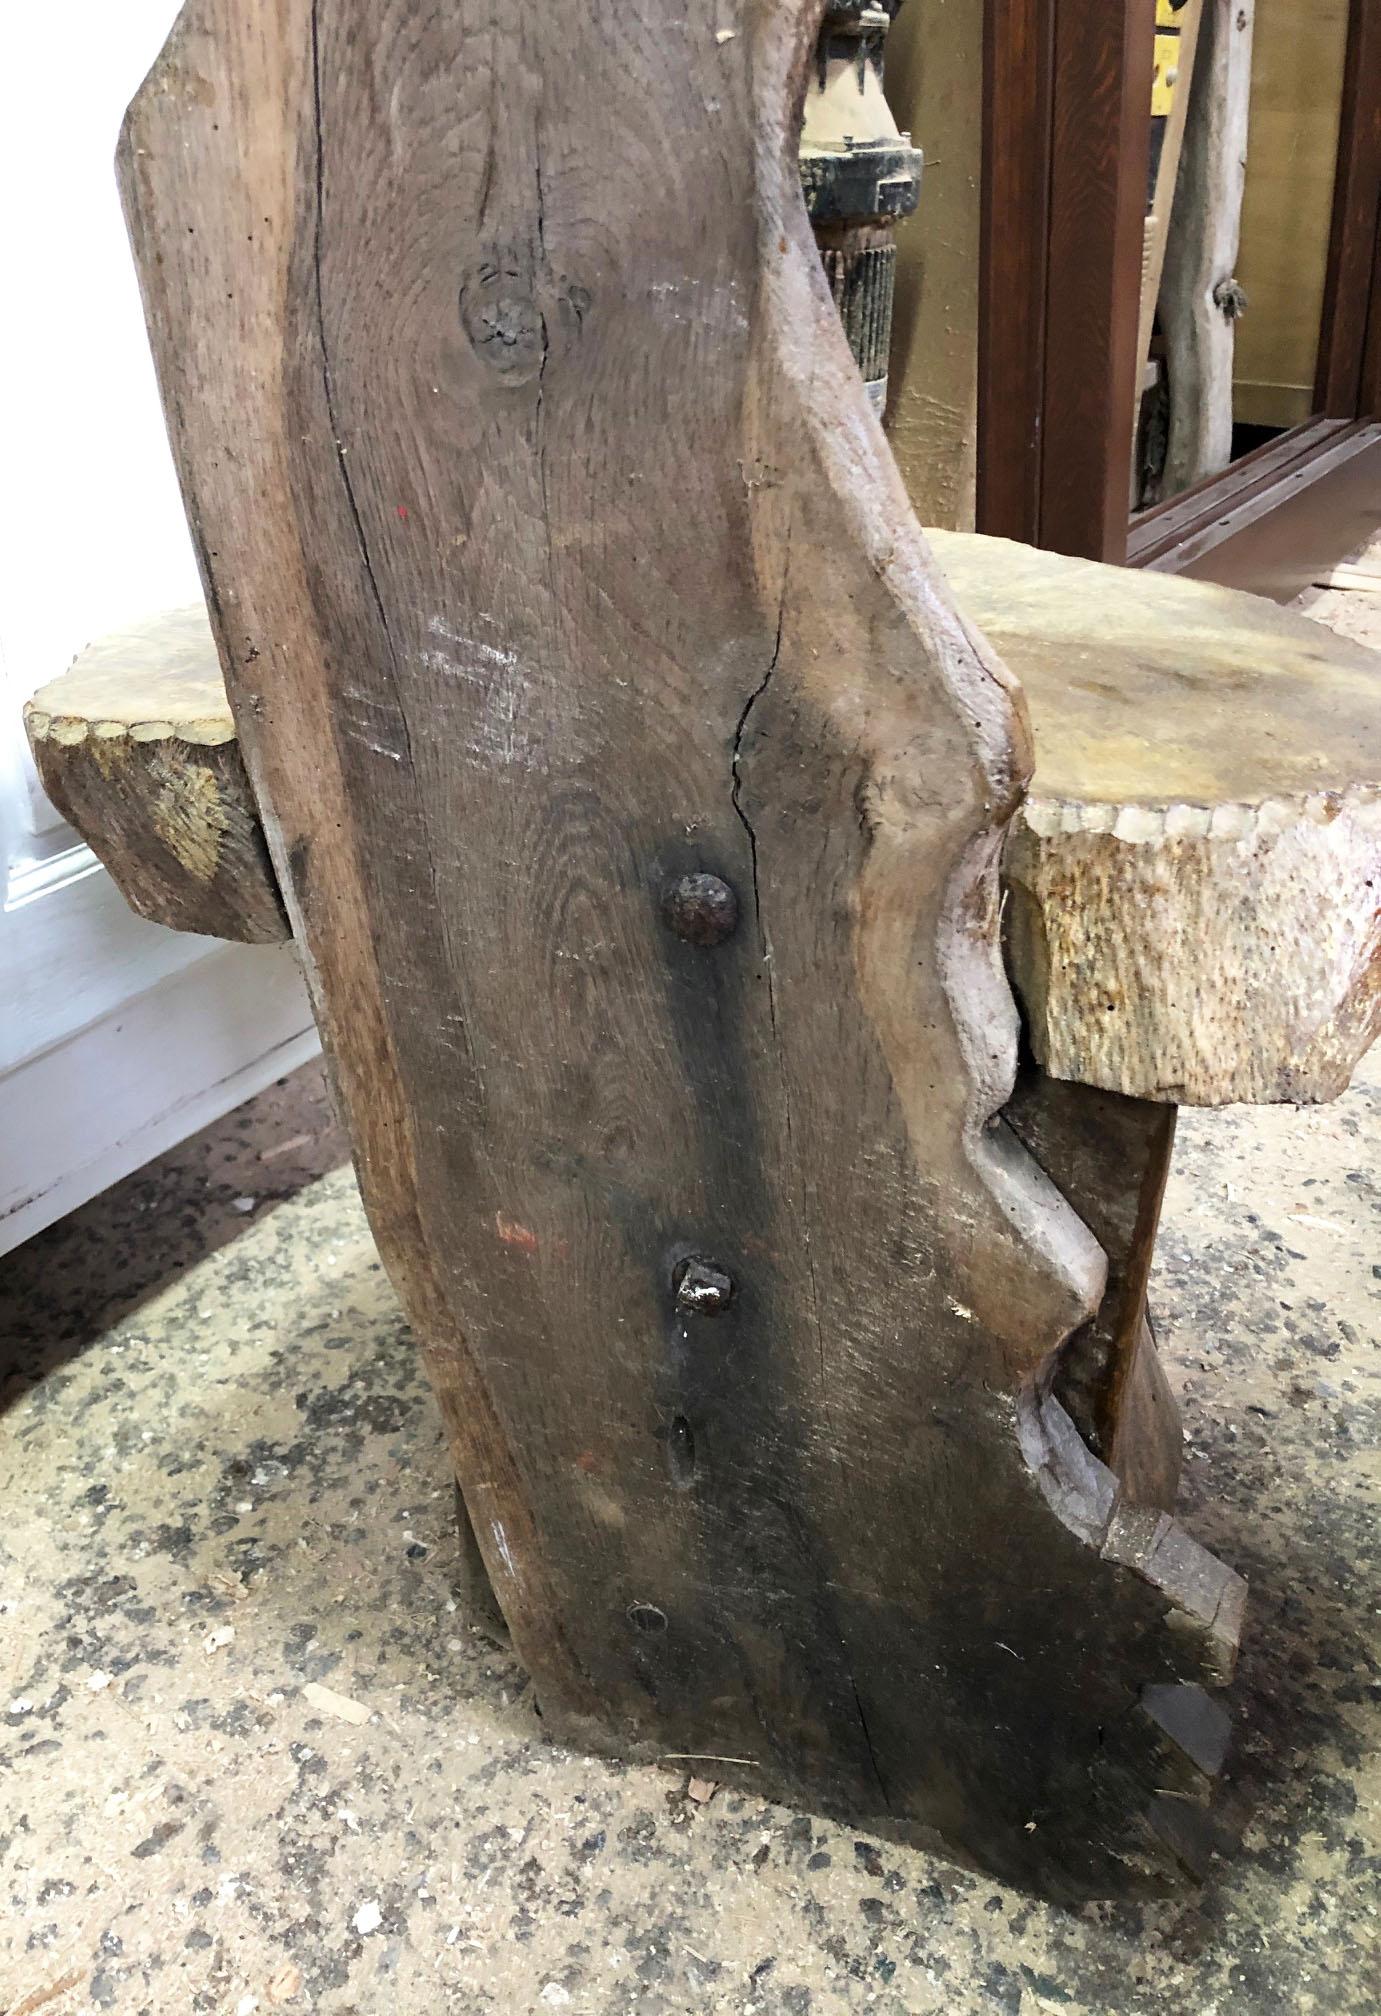 It is a large and hight chair, in oak, original Italian from 1900, Folk Art.
The paint is original in patina, honey amber color.
 As shown in the photographs and videos, there are some small imperfect spots that prove its authenticity.
Coming from a